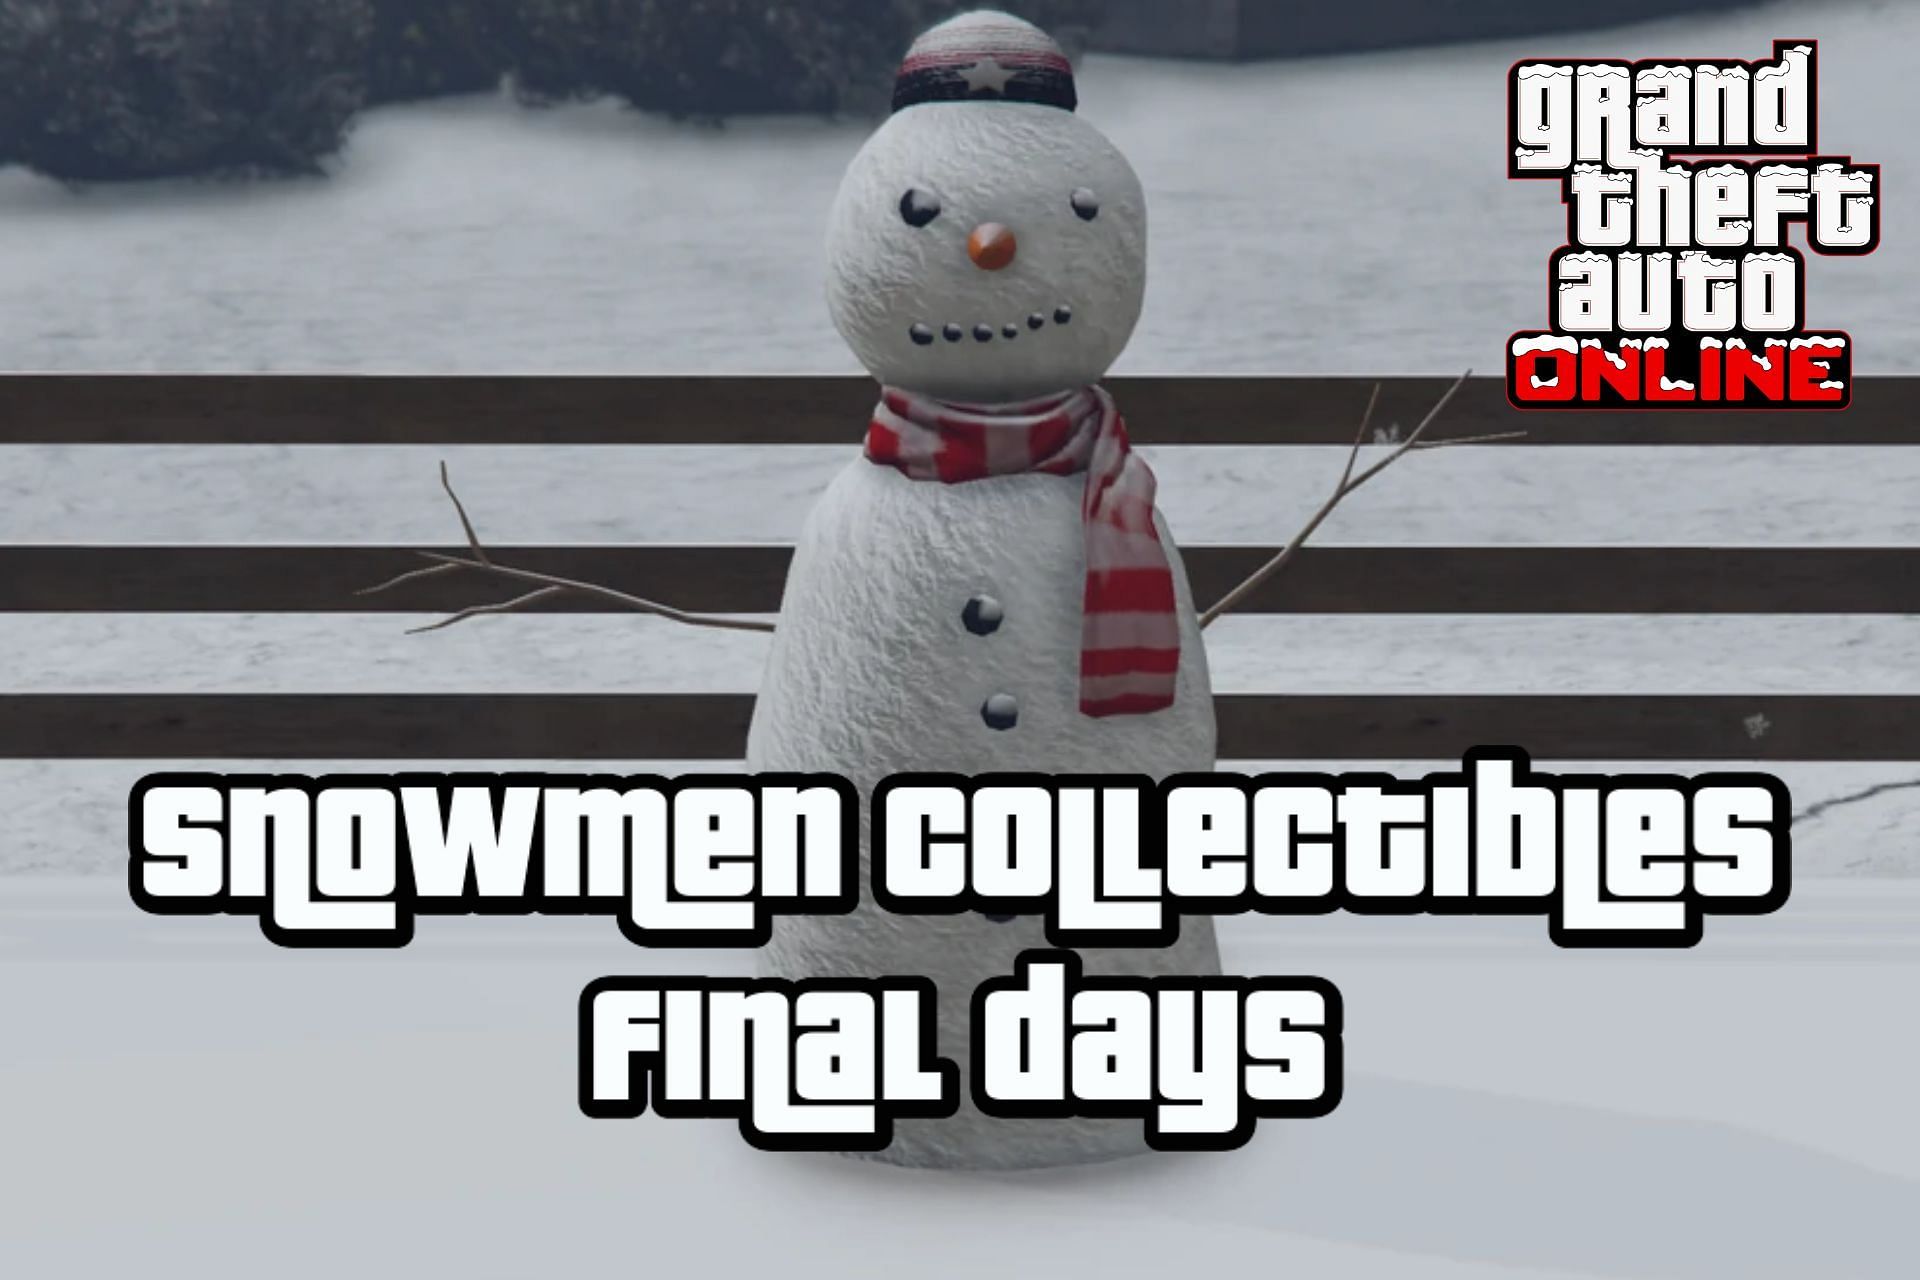 Rockstar Games extended Snowmen Collectibles event for another week in GTA Online (Image via Sportskeeda)